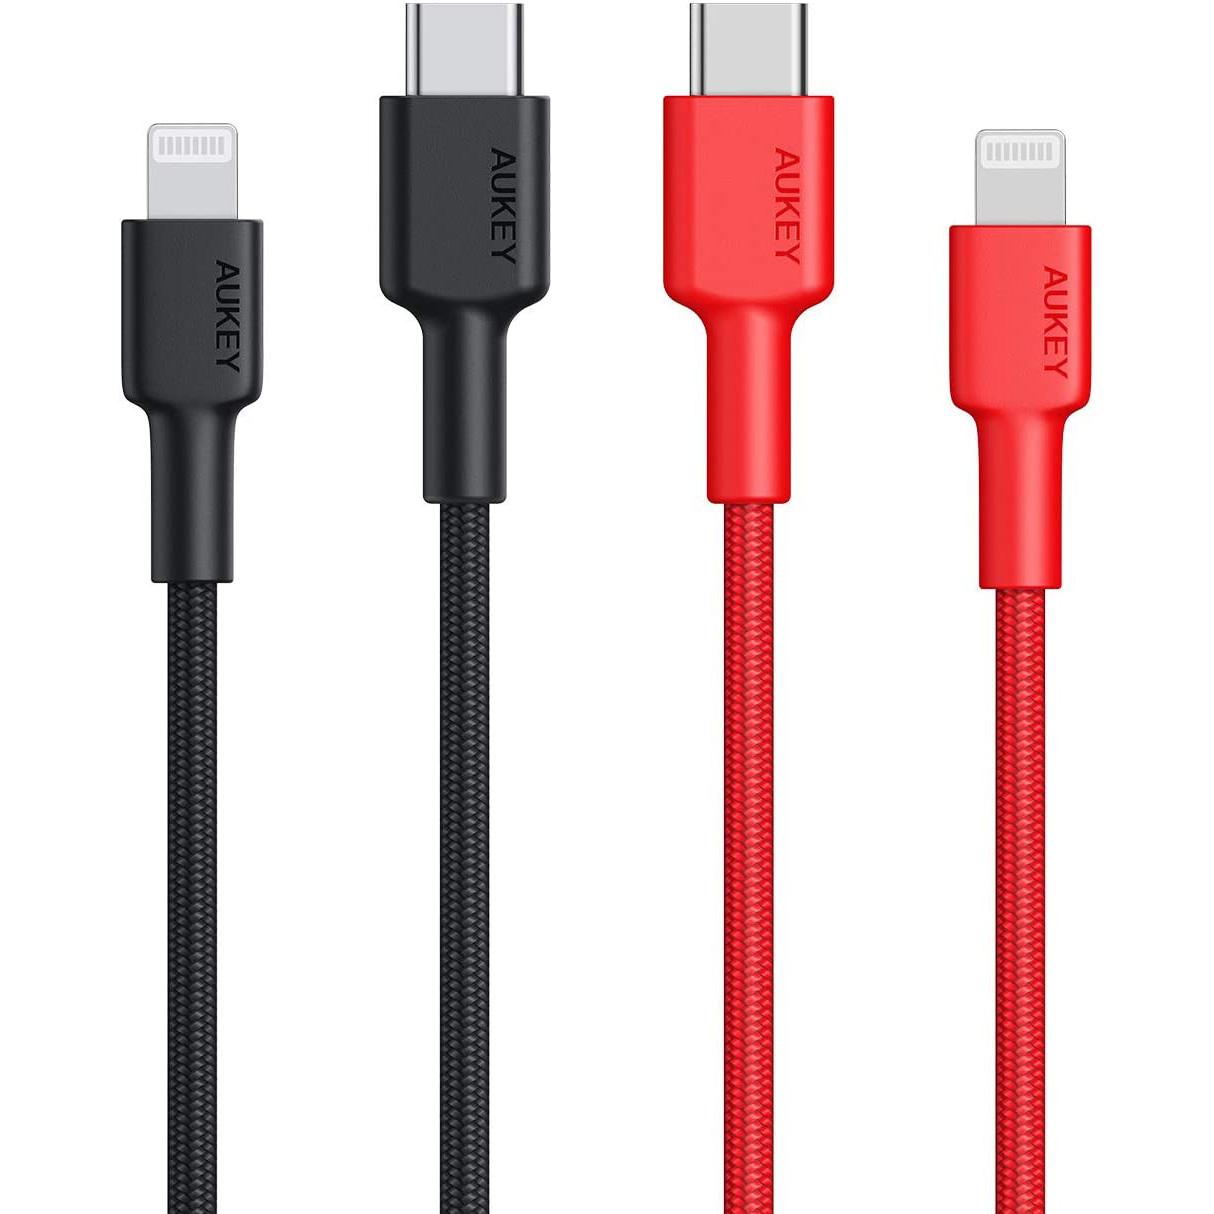 2 Aukey USB-C to Lightning Cable for $11.49